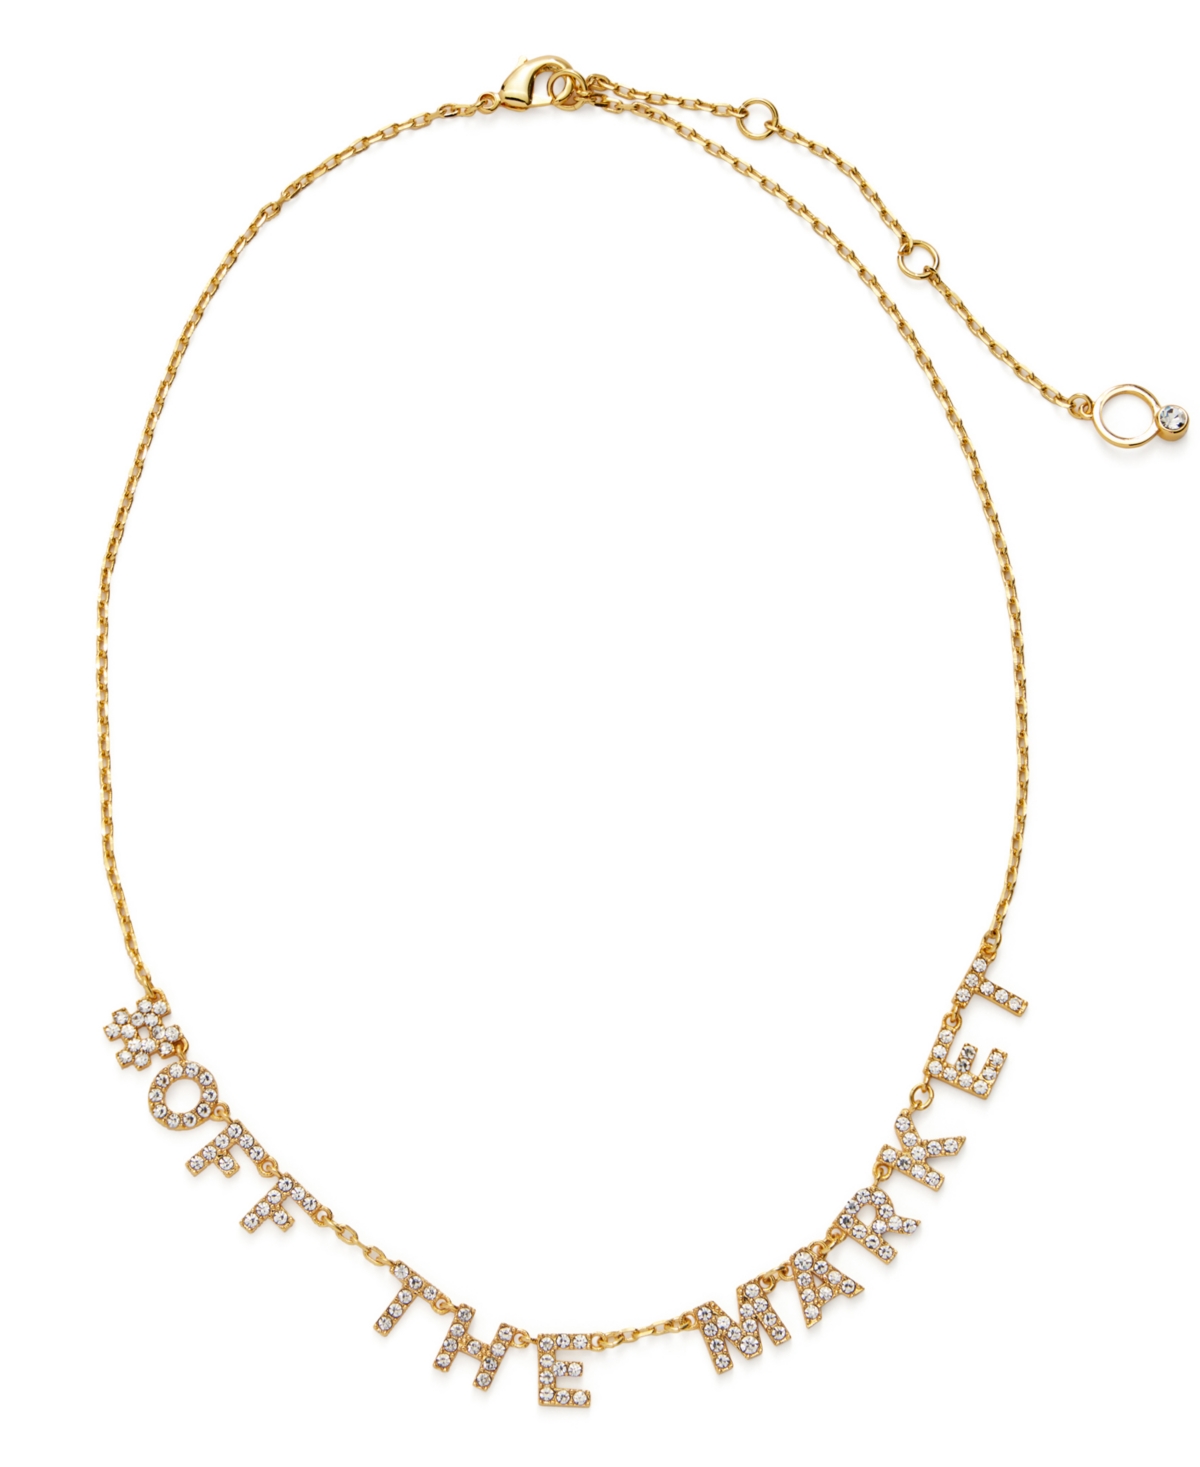 Faux Stone Pave Off The Market Bib Necklace - Crystal, Rhodium